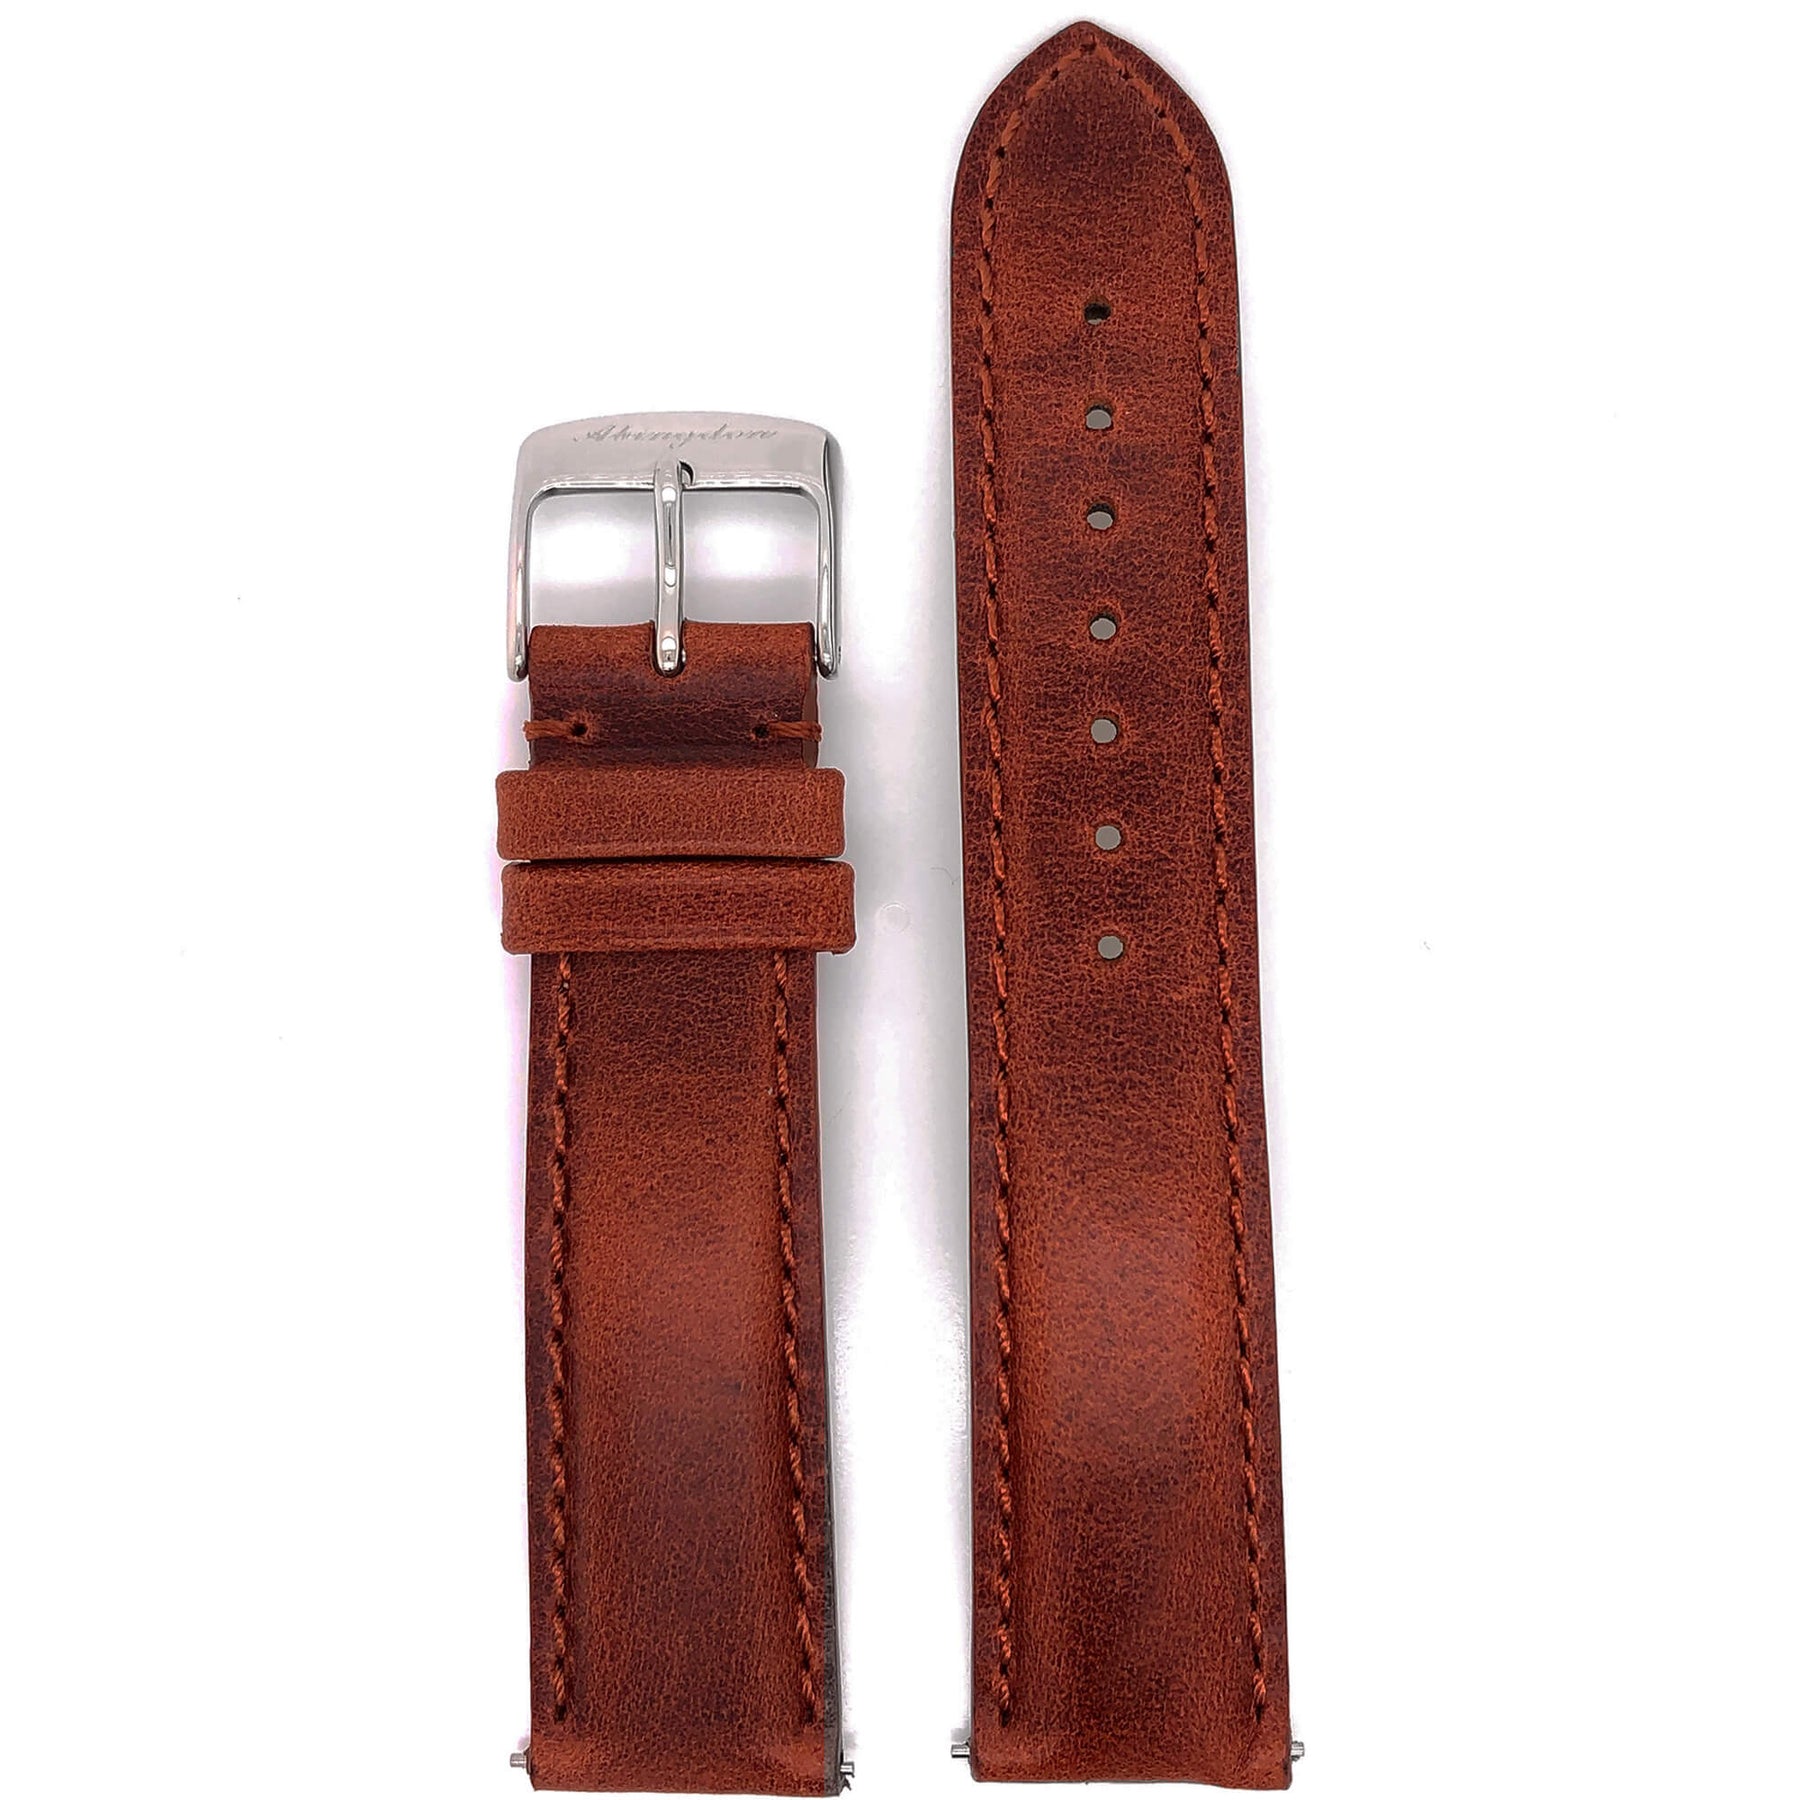 BAND – 20mm Oil Tan Leather Matching Stitch - The Abingdon Co., aviation, dive, tactical watches for women